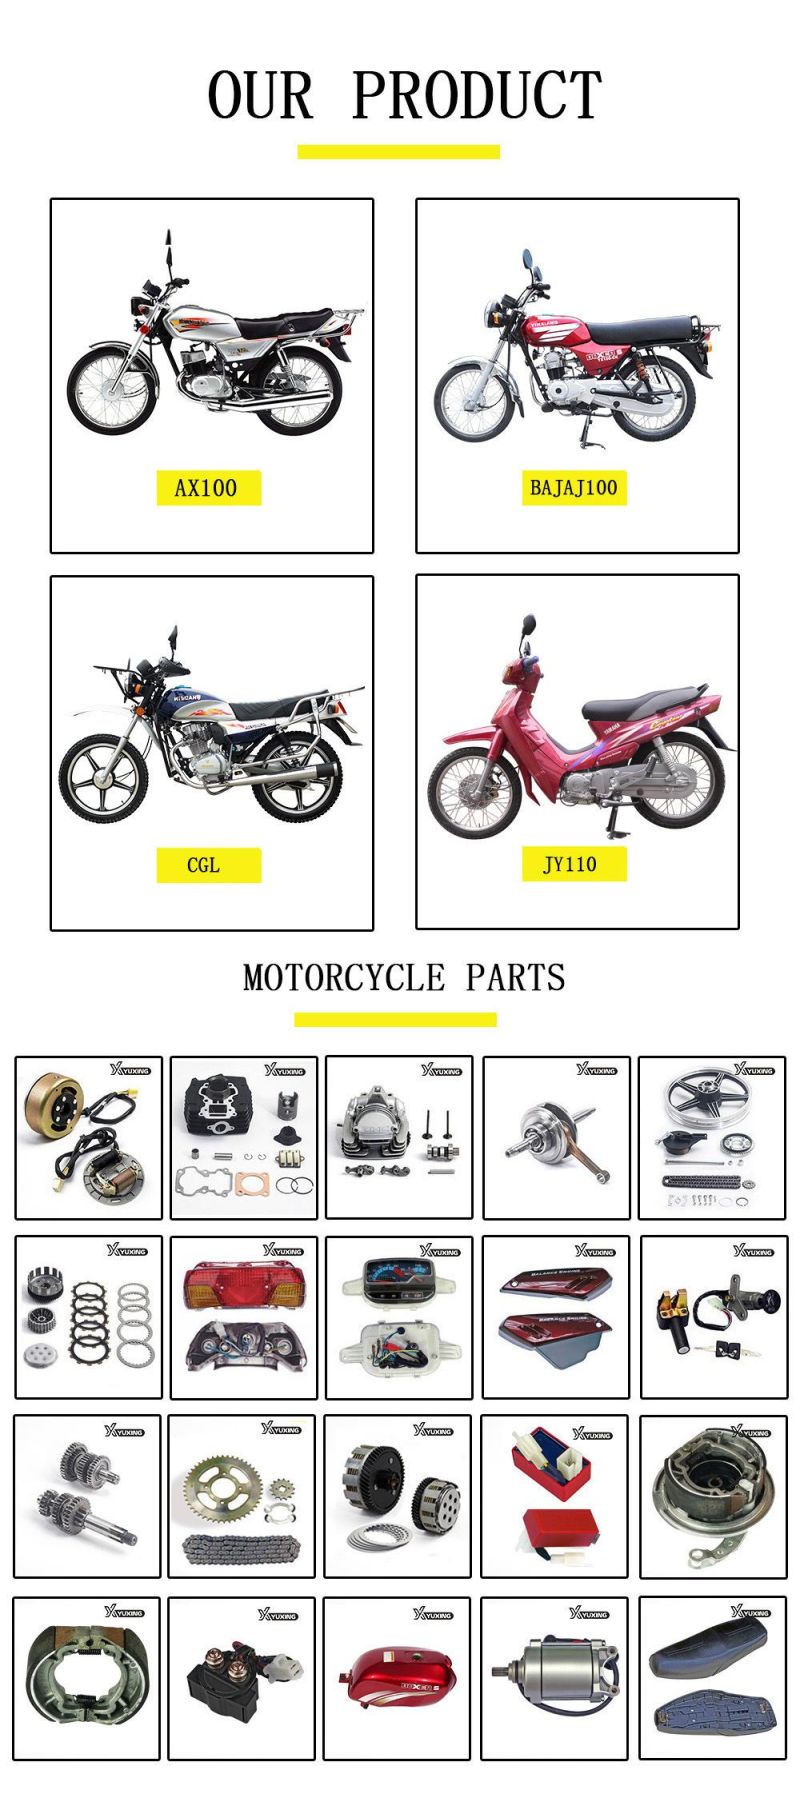 Motorcycle Accessories Spare Parts Scooter Engine Parts Motorcycle Carburetor